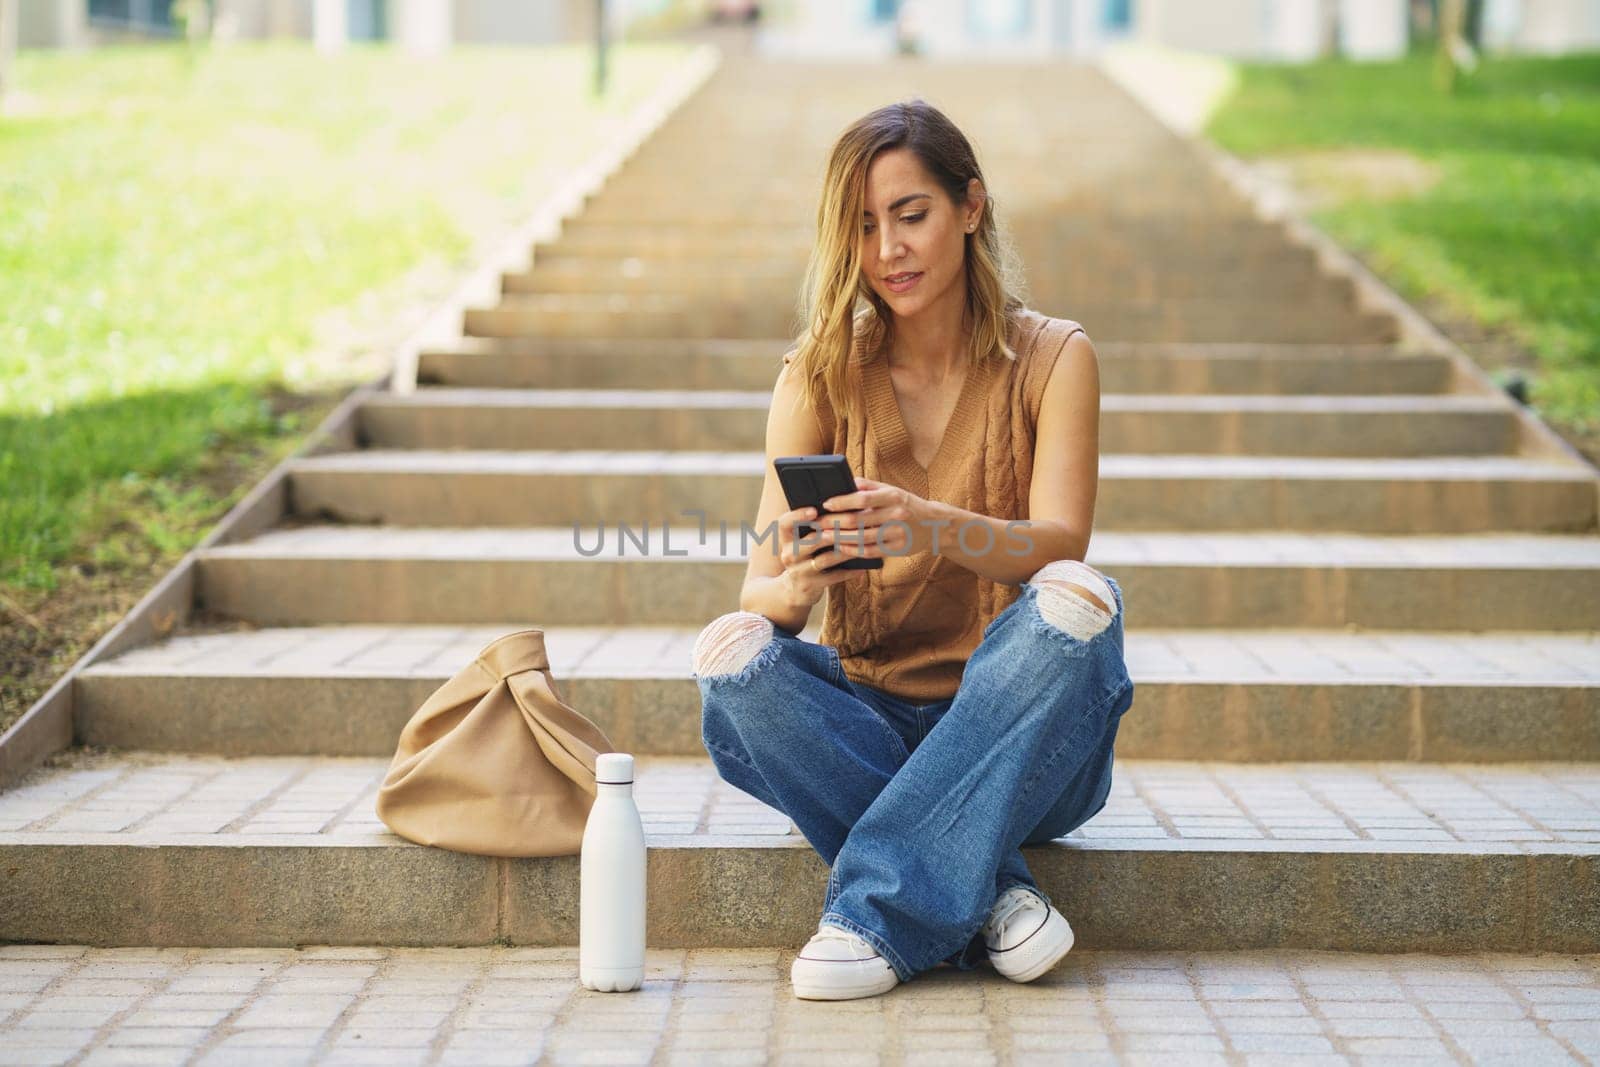 Full body adult female in stylish clothes sitting on stairs near bag and bottle and browsing social media on cellphone on street